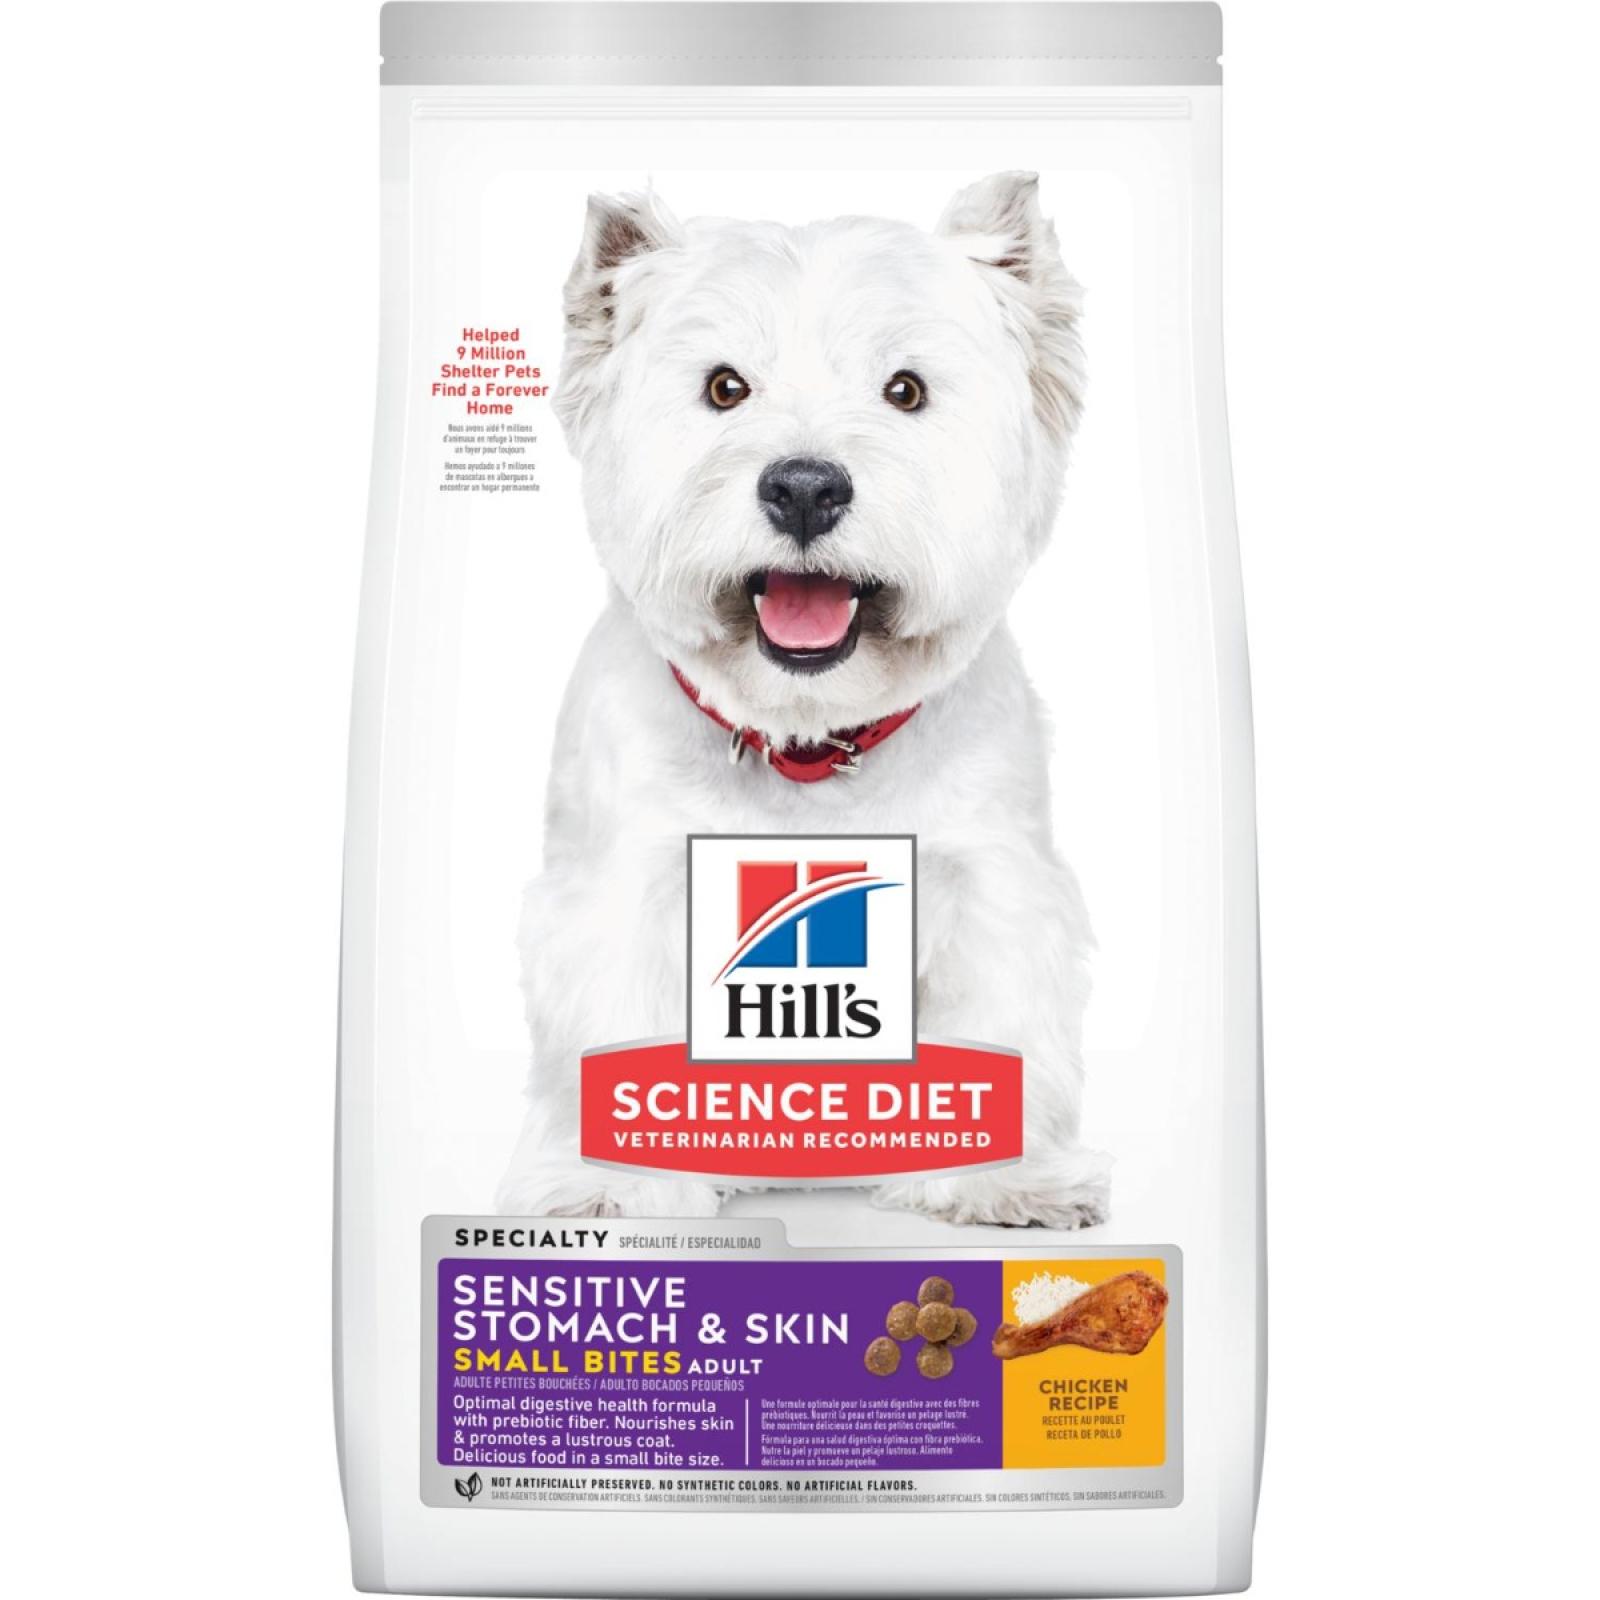 Hill's Science Diet Adult Sensitive Stomach & Skin Small Bites